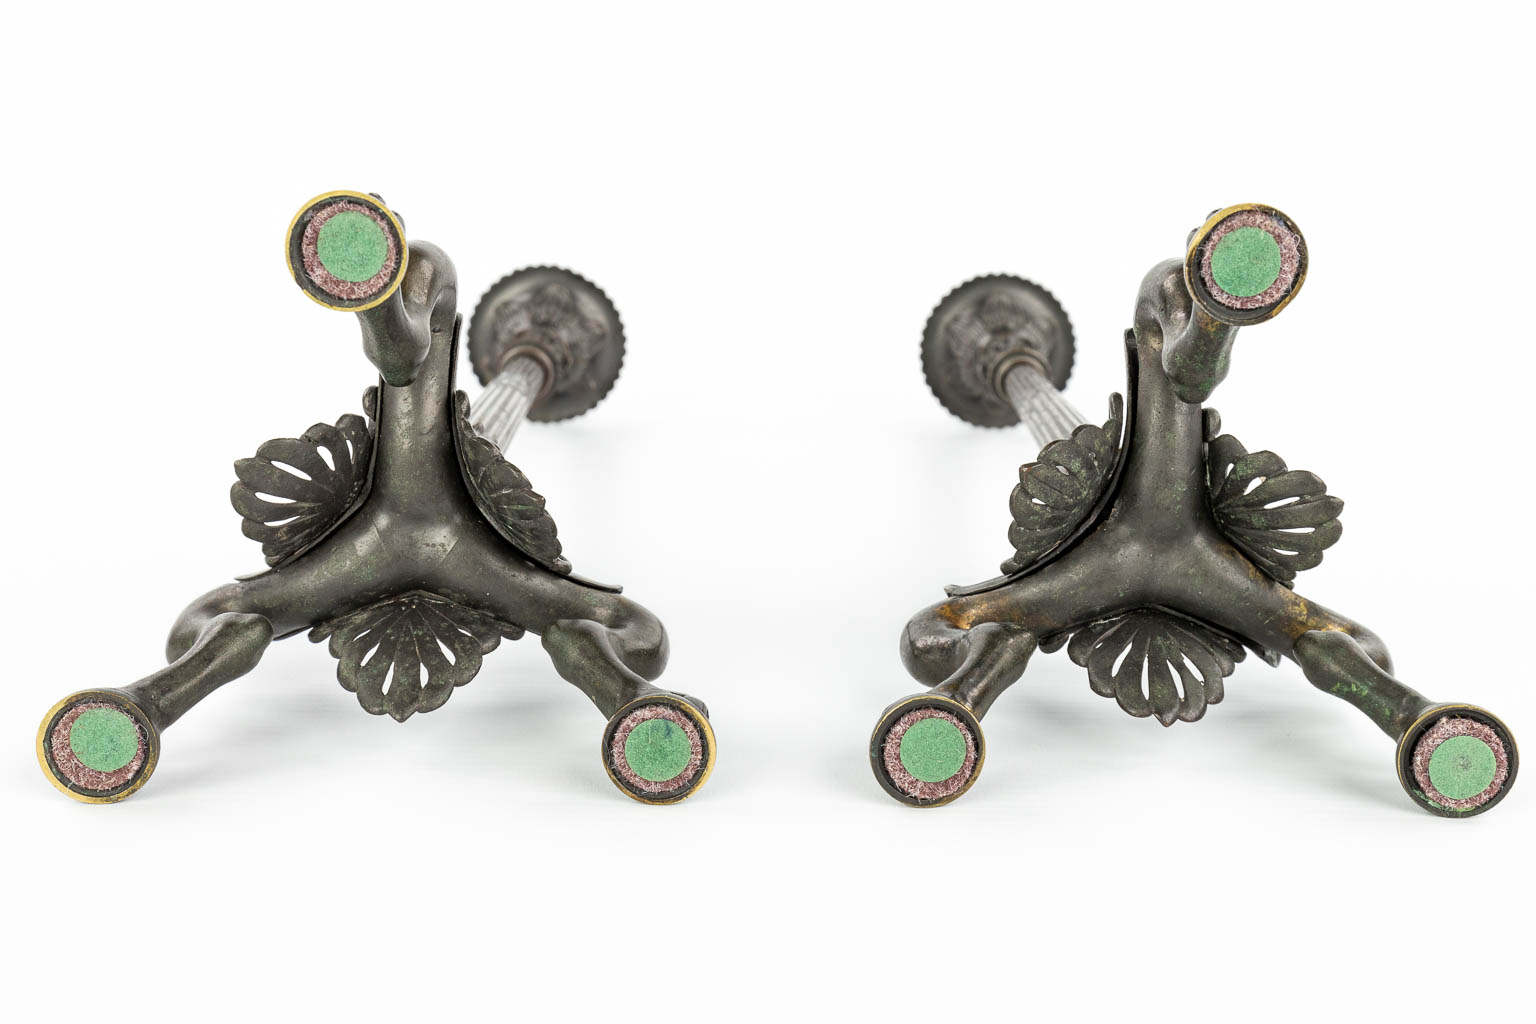 A pair of candlesticks made of bronze in empire style, probably made by Barbedienne. (H:36,5cm)